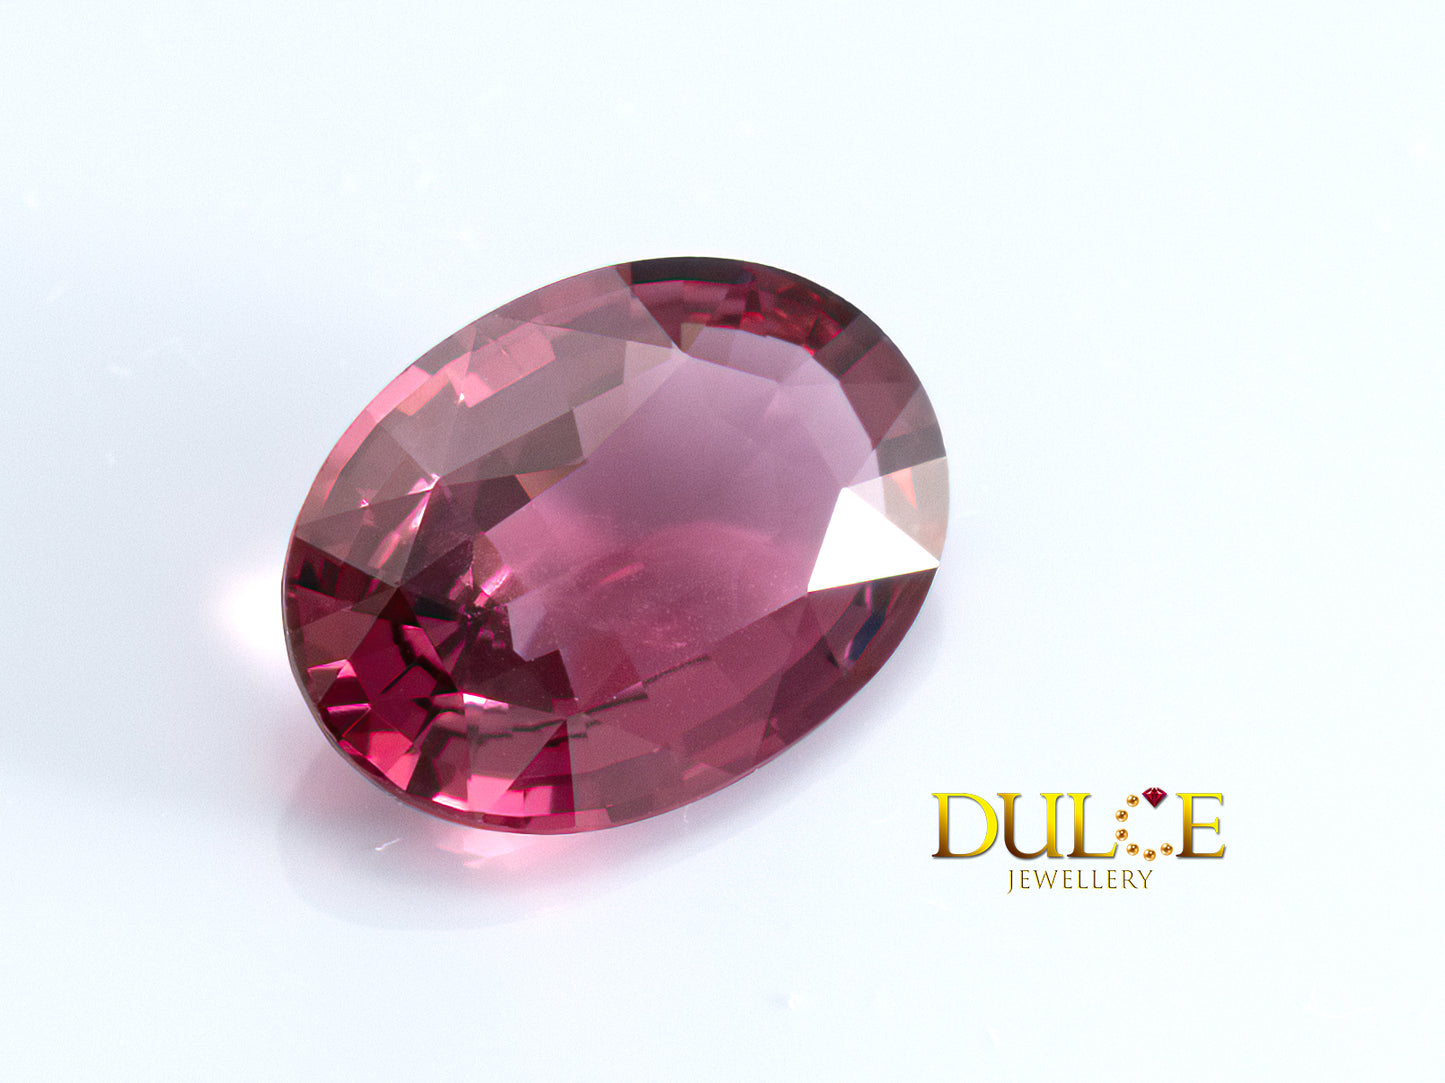 Red Spinel (Spinel133) (Price to be requested)